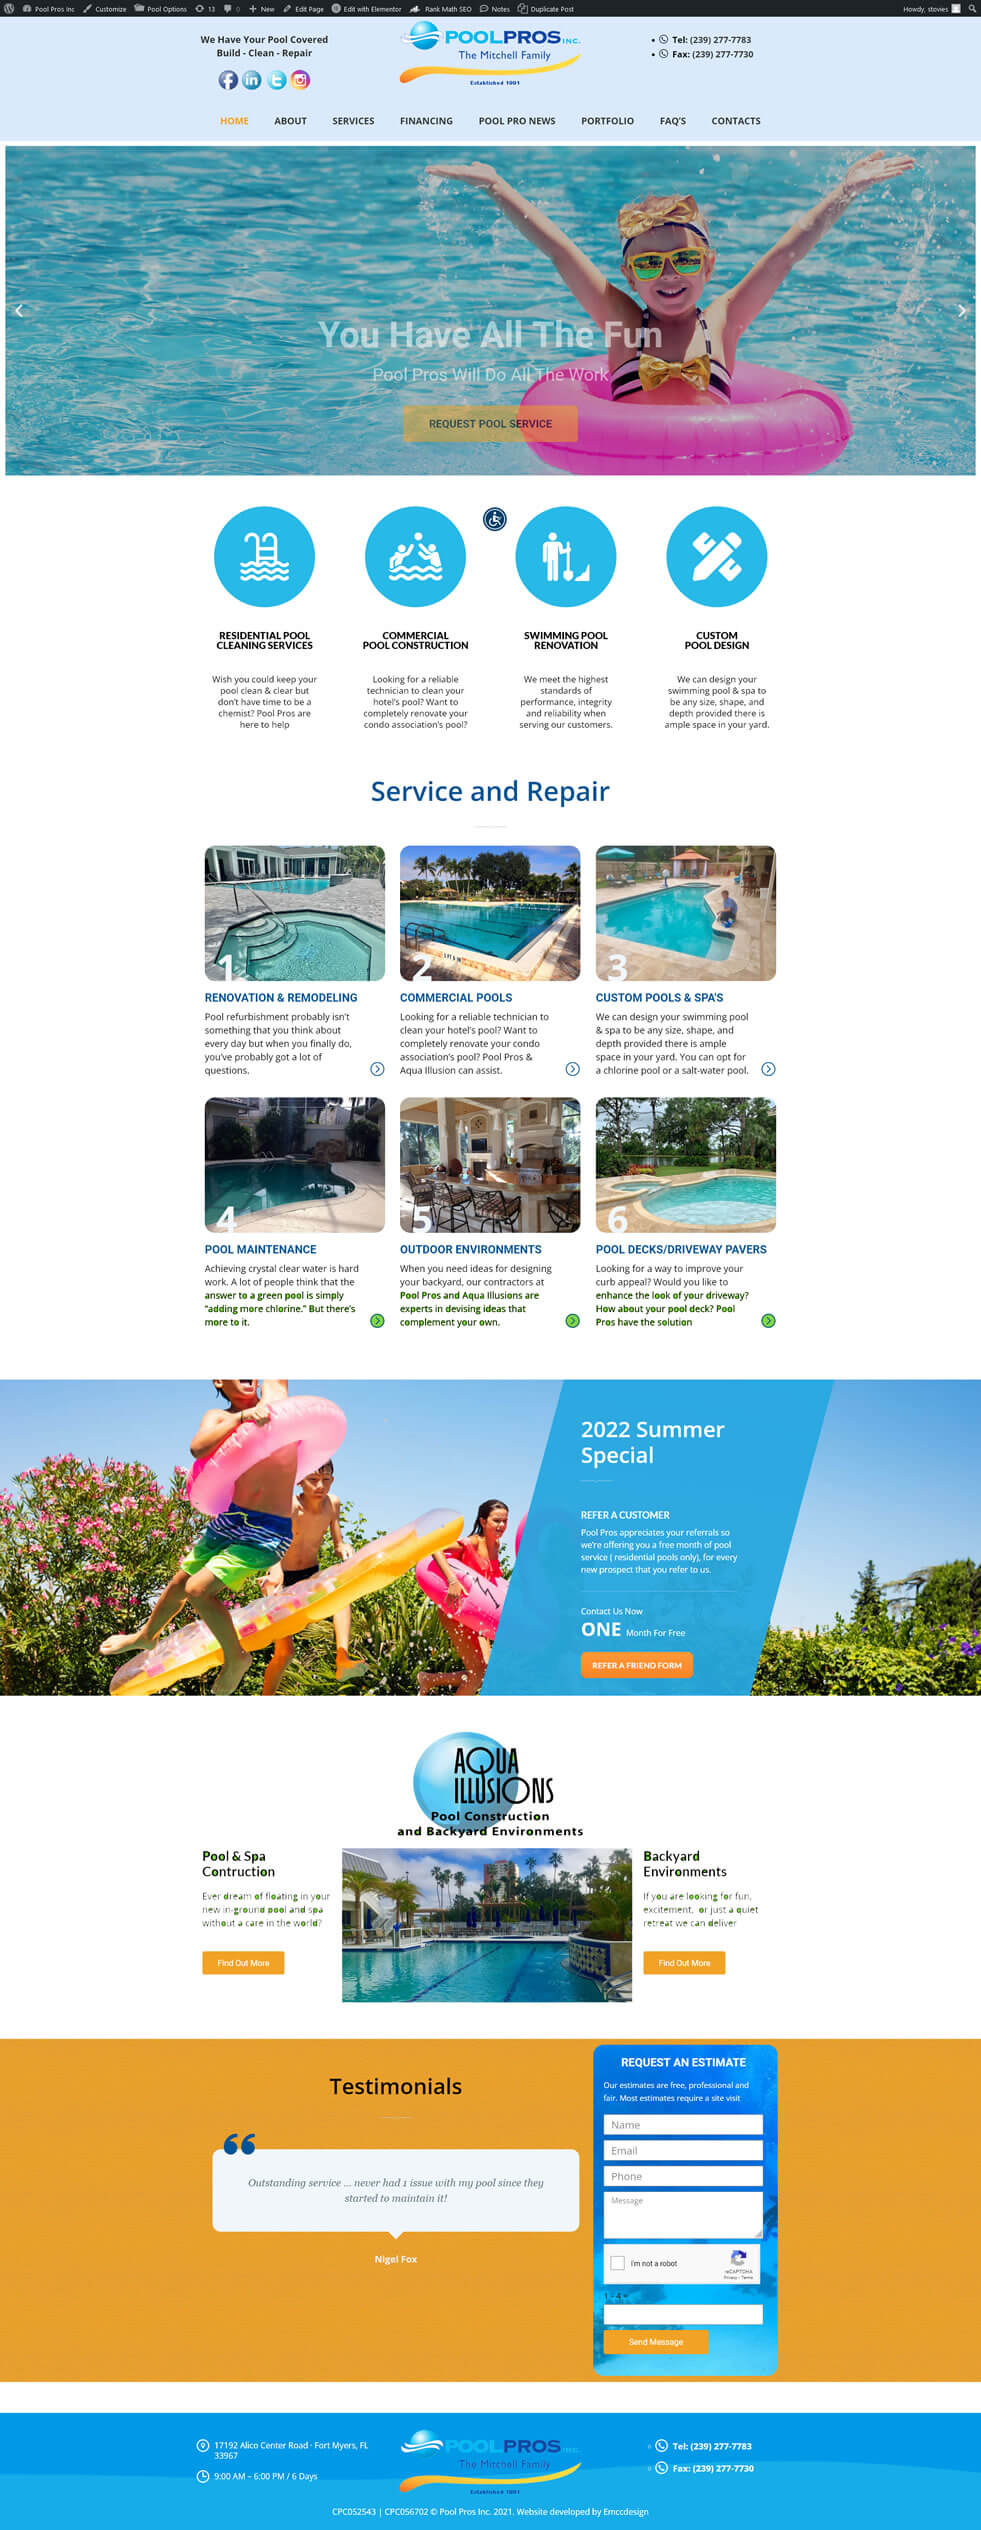 PoolPros Designed by EMCC